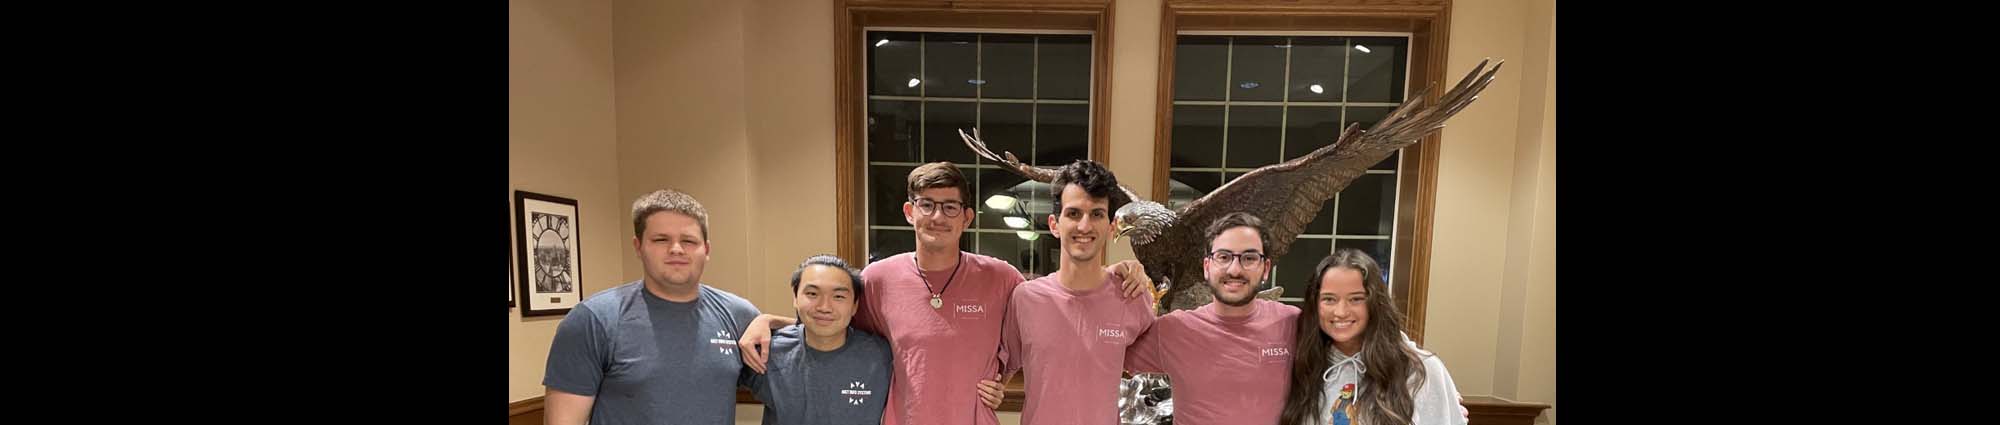 MISSA office bearers shown from left to right:  Jeffrey Nightengale - Treasurer, Kevin Chen - Communications Chair, Connor Burns - Secretary, John Foster - President, Edward Reali - VP of Operations, Vivian Culver - Vice President.